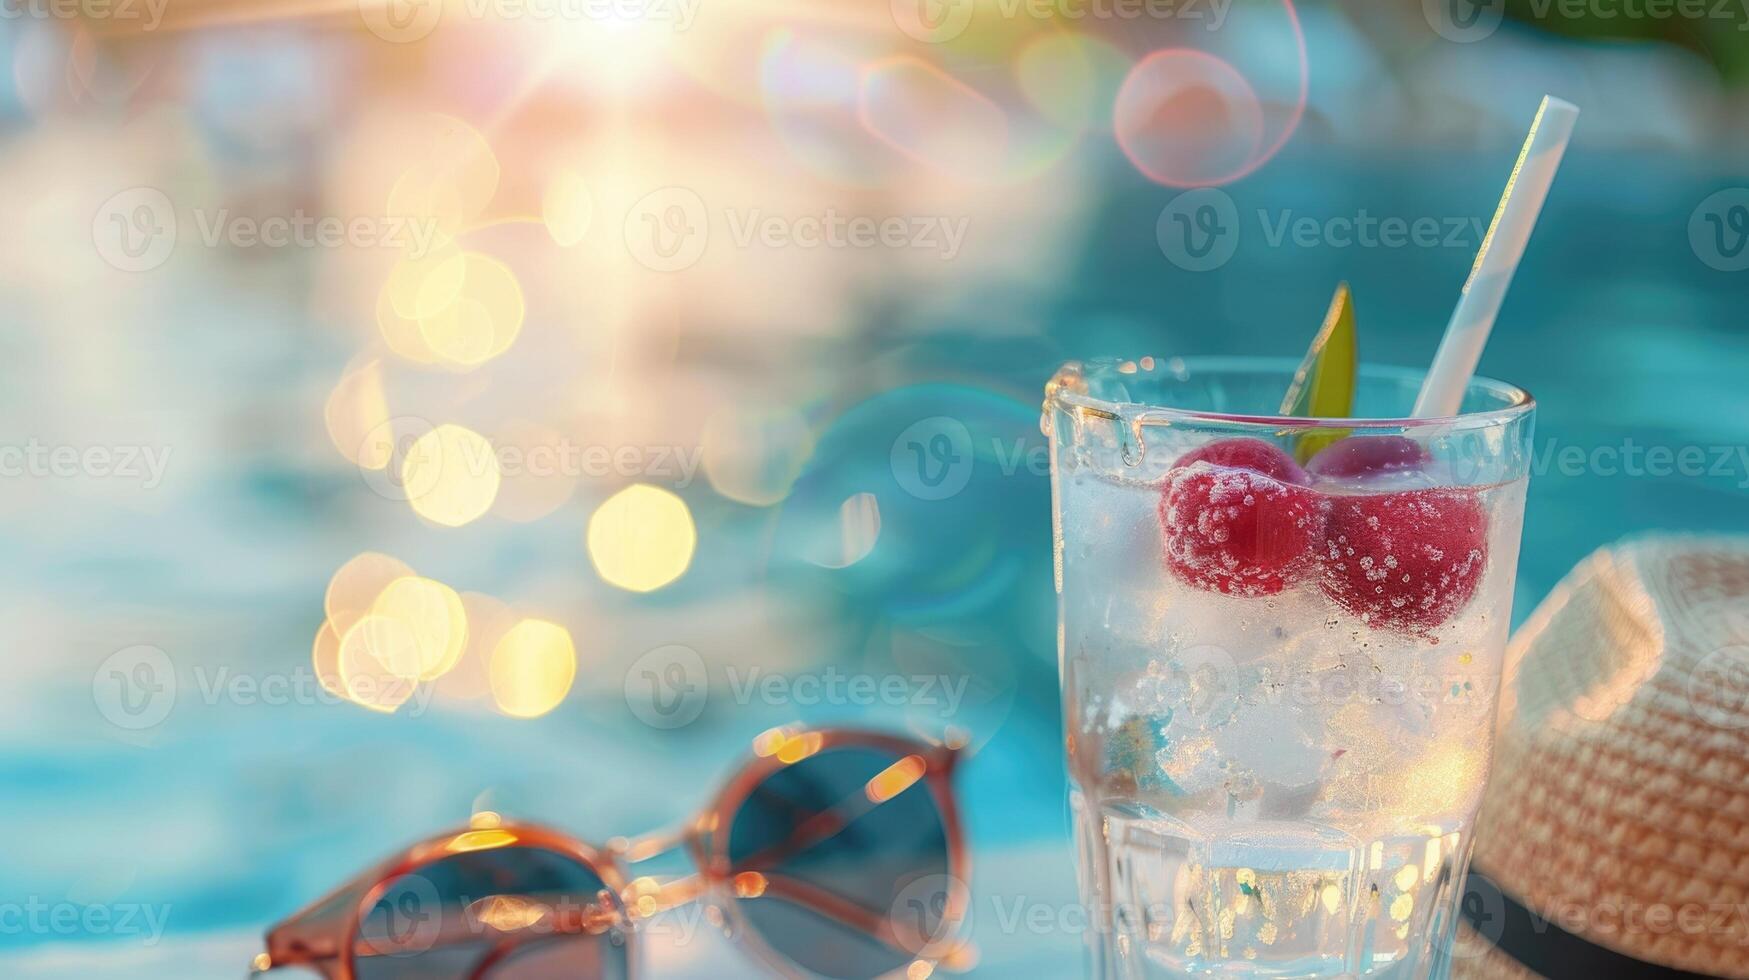 Summer cocktails with lychee soda sunglasses and straw hat. photo